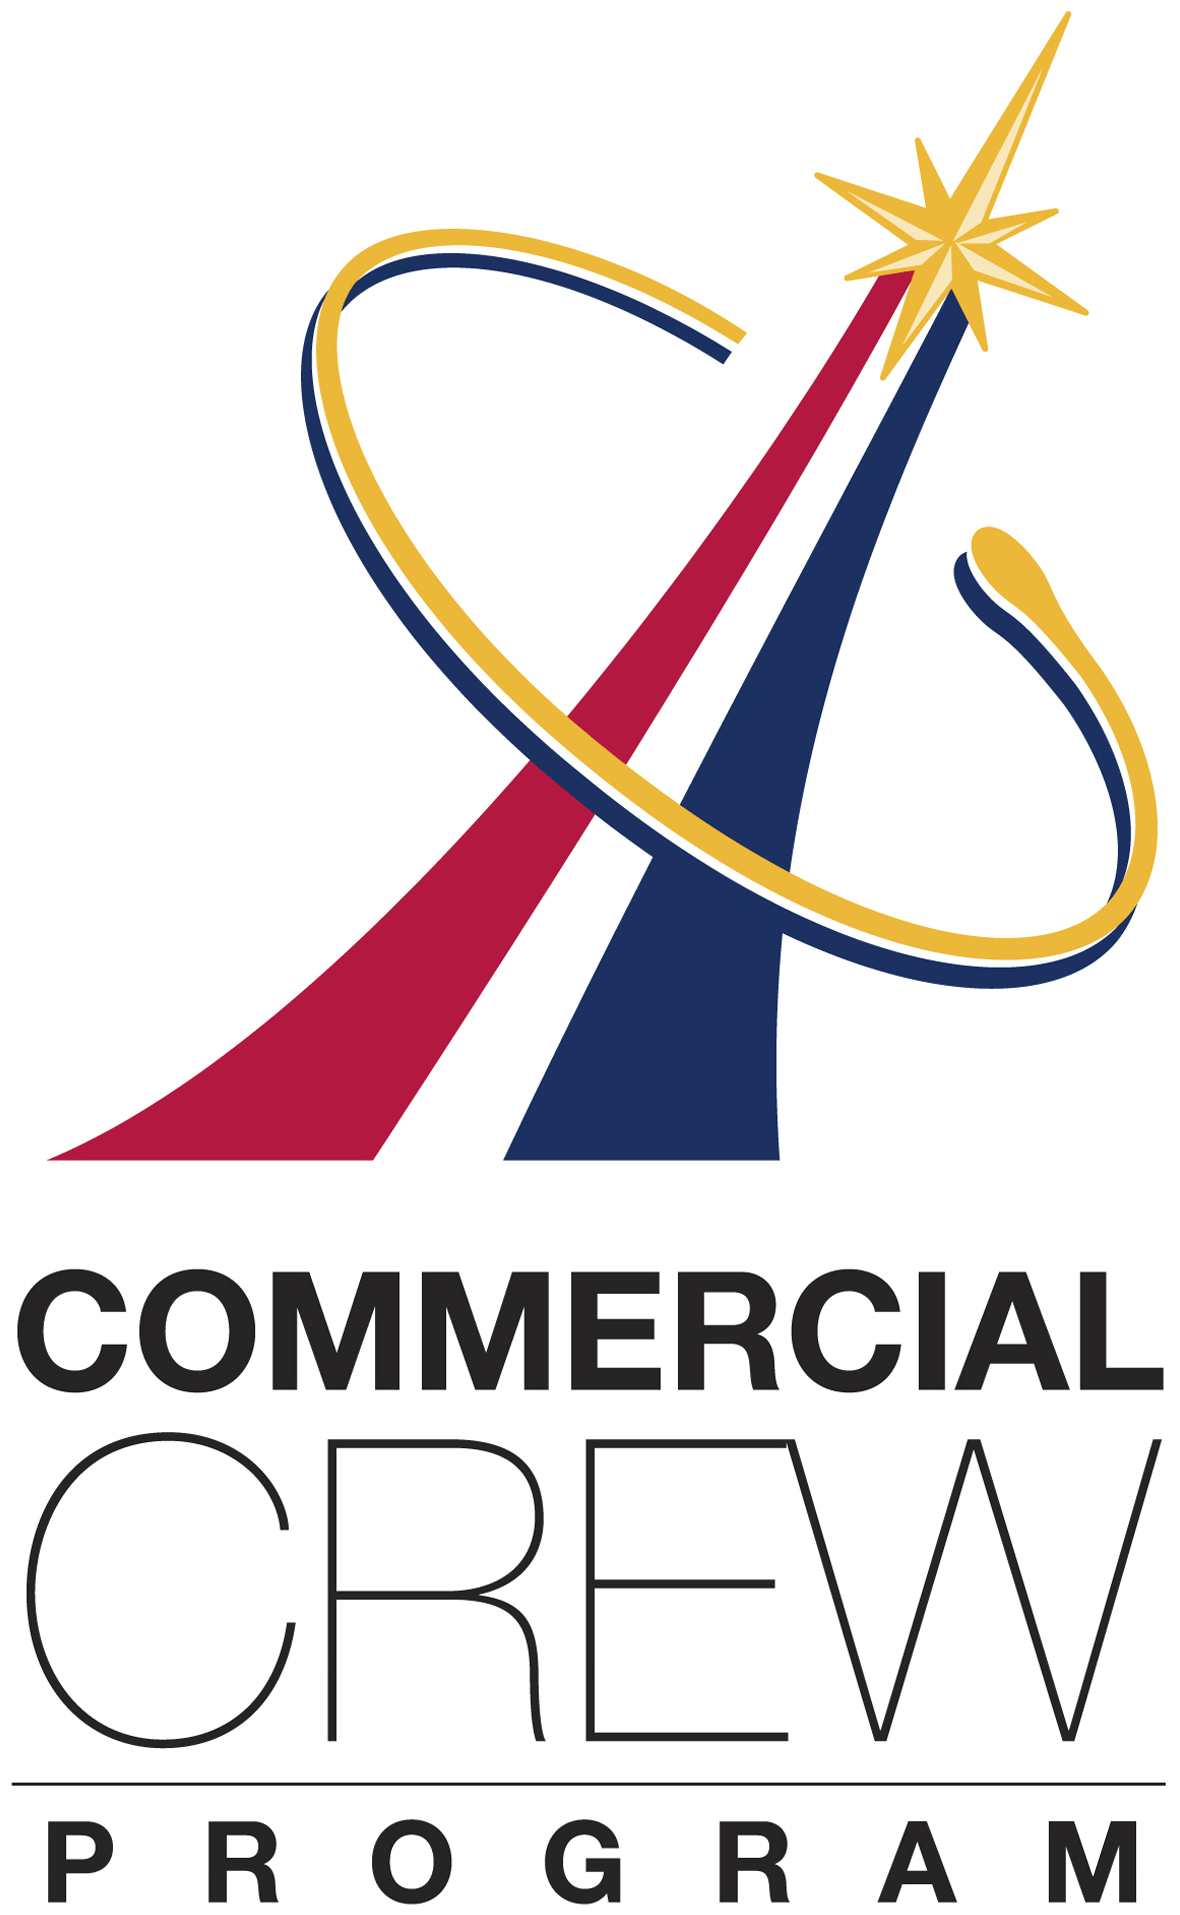 Commercial Logo - File:Commercial Crew Program logo - white background.png - Wikimedia ...